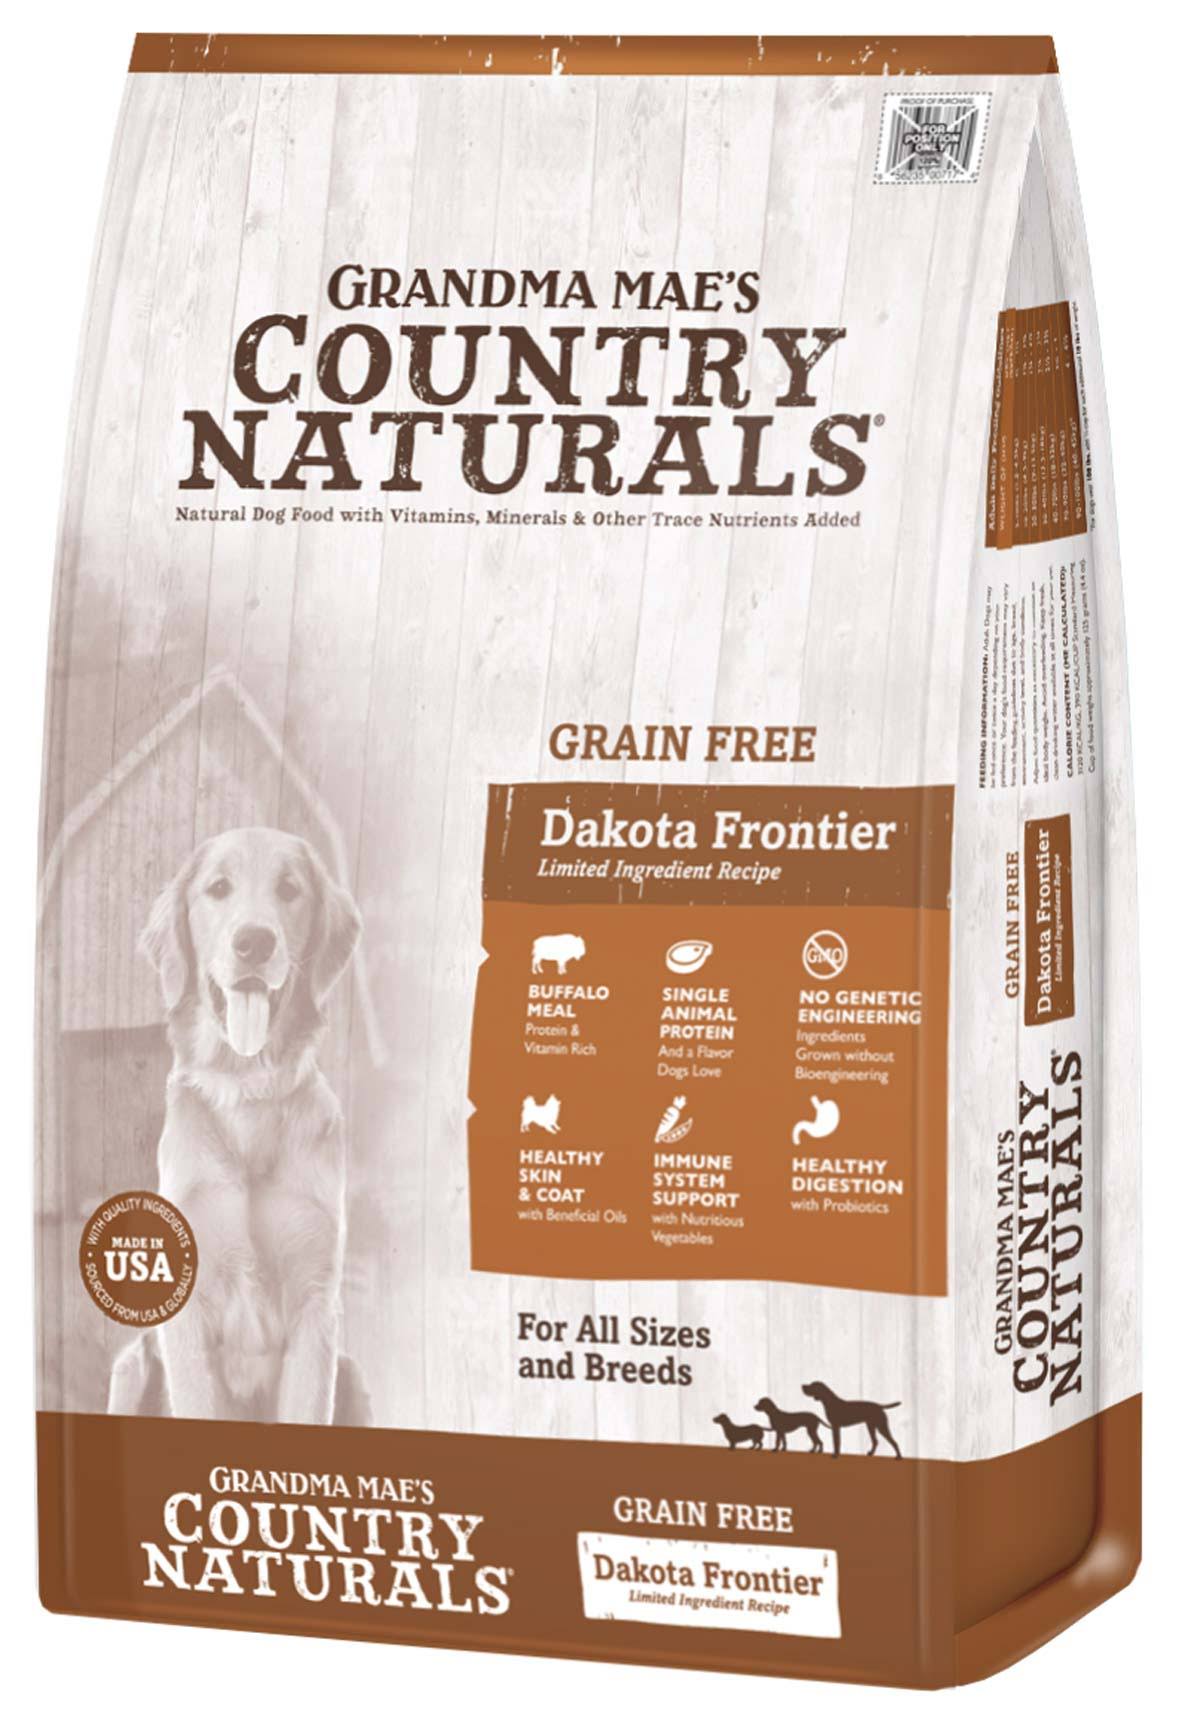 Grandma Mae's Country Naturals, Grain Free Buffalo Limited Ingredient (Dakota Frontier) Dry Dog Food, 25 Pounds